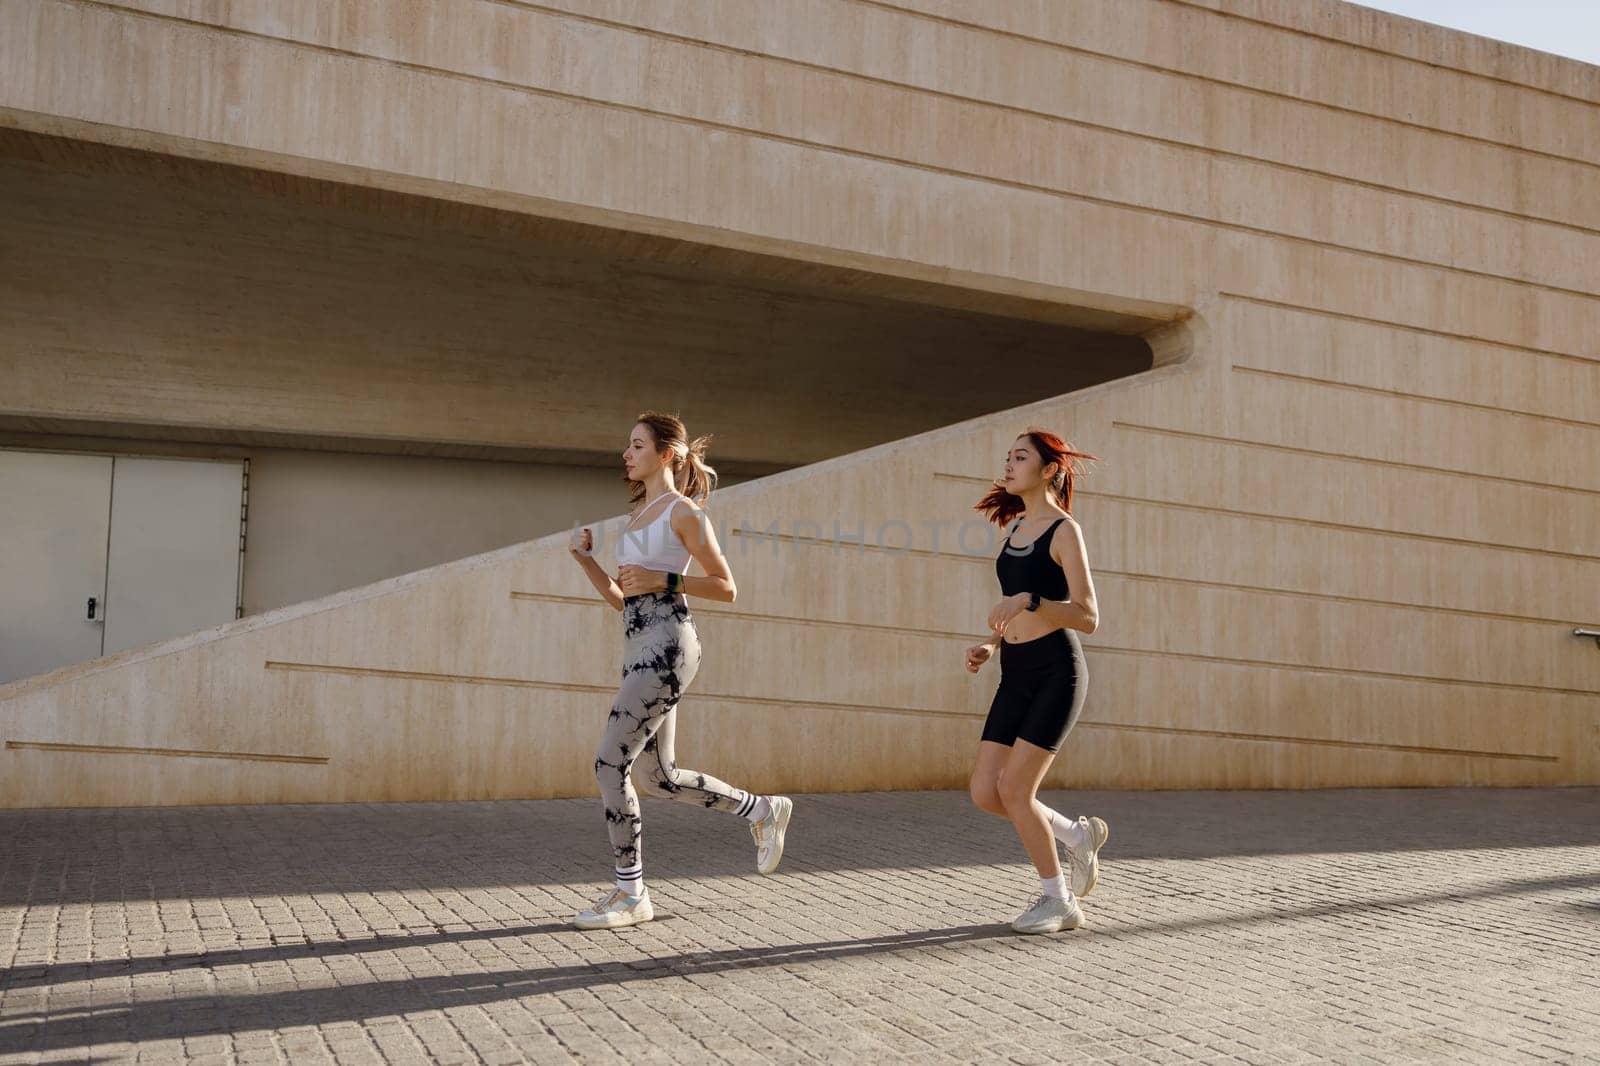 Two smiling women athlete running side by side along an outdoor track on modern buildings background by Yaroslav_astakhov